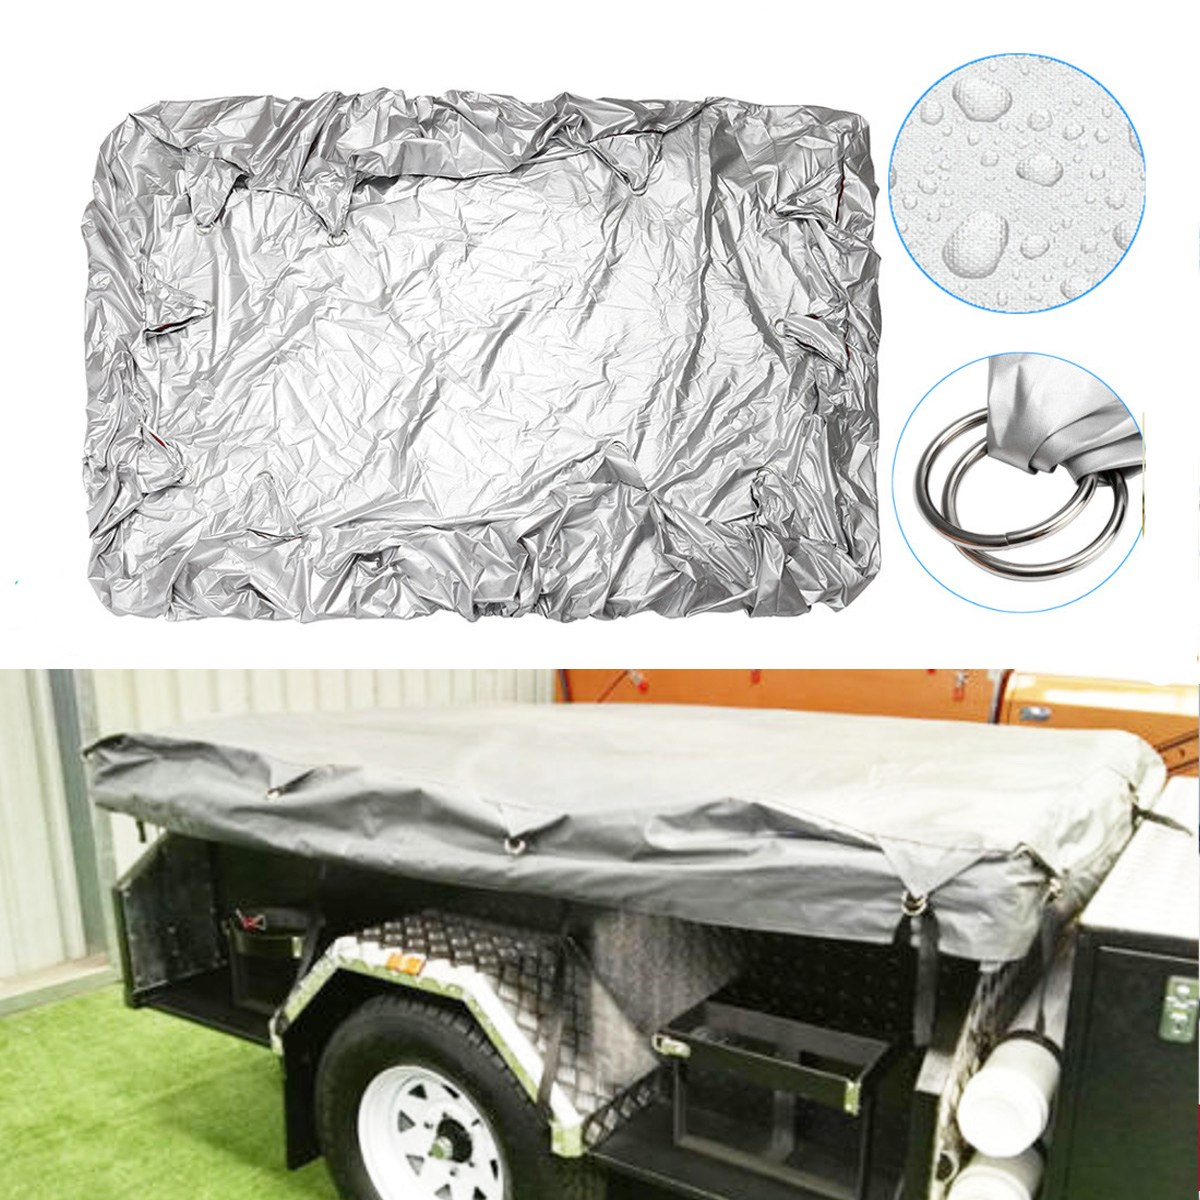 

225x170cmx35cm Camping Trailer Tent Waterproof Cover Anti-UV Dust Protector